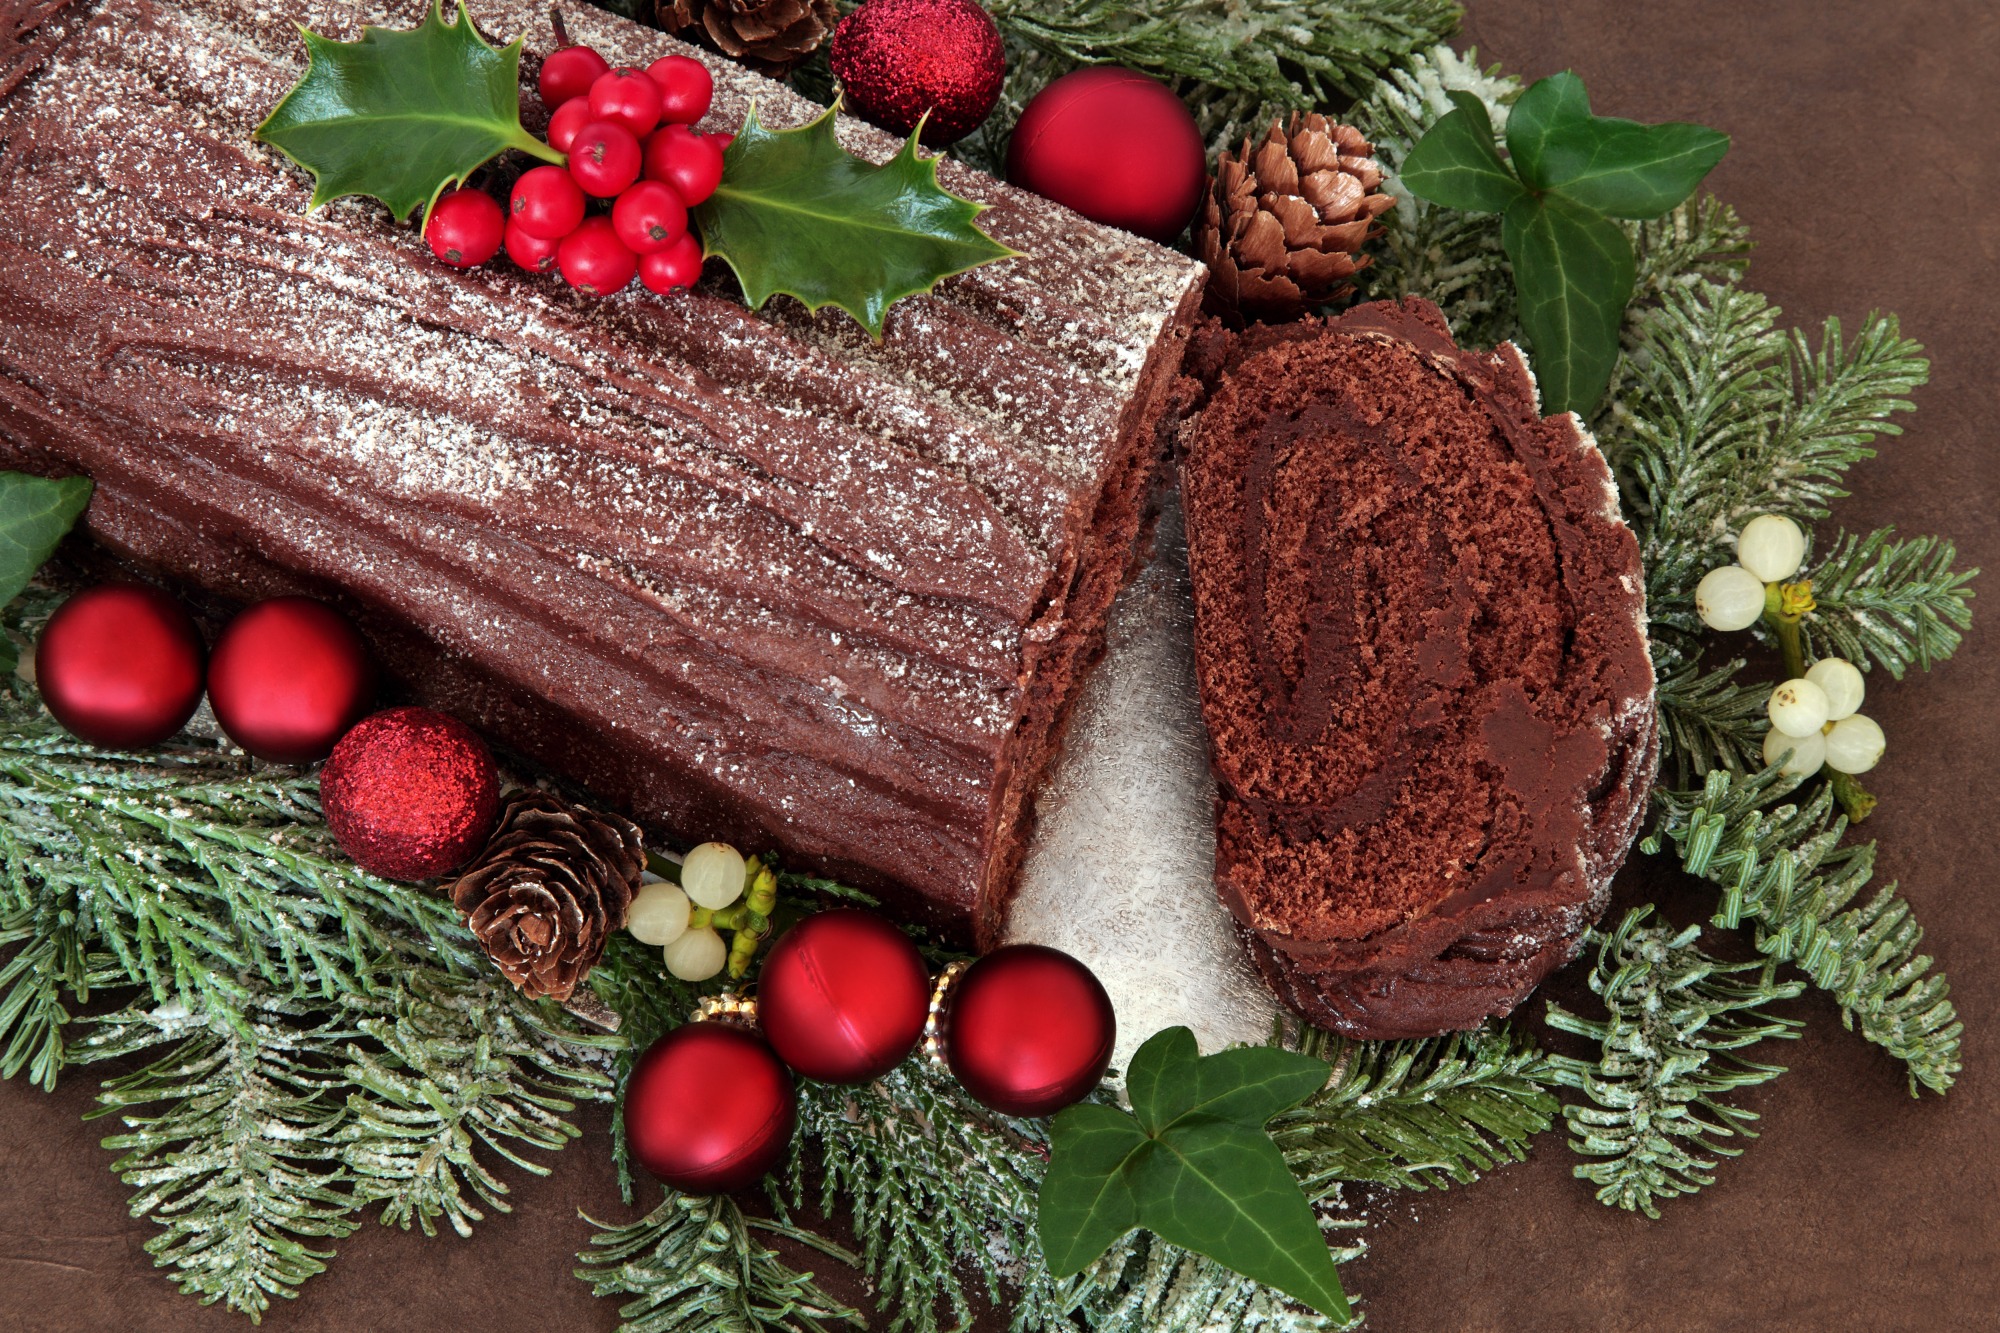 Celebrating the spirit of Christmas with a Chocolate Yule log &copy; marilyna | 123RF.com